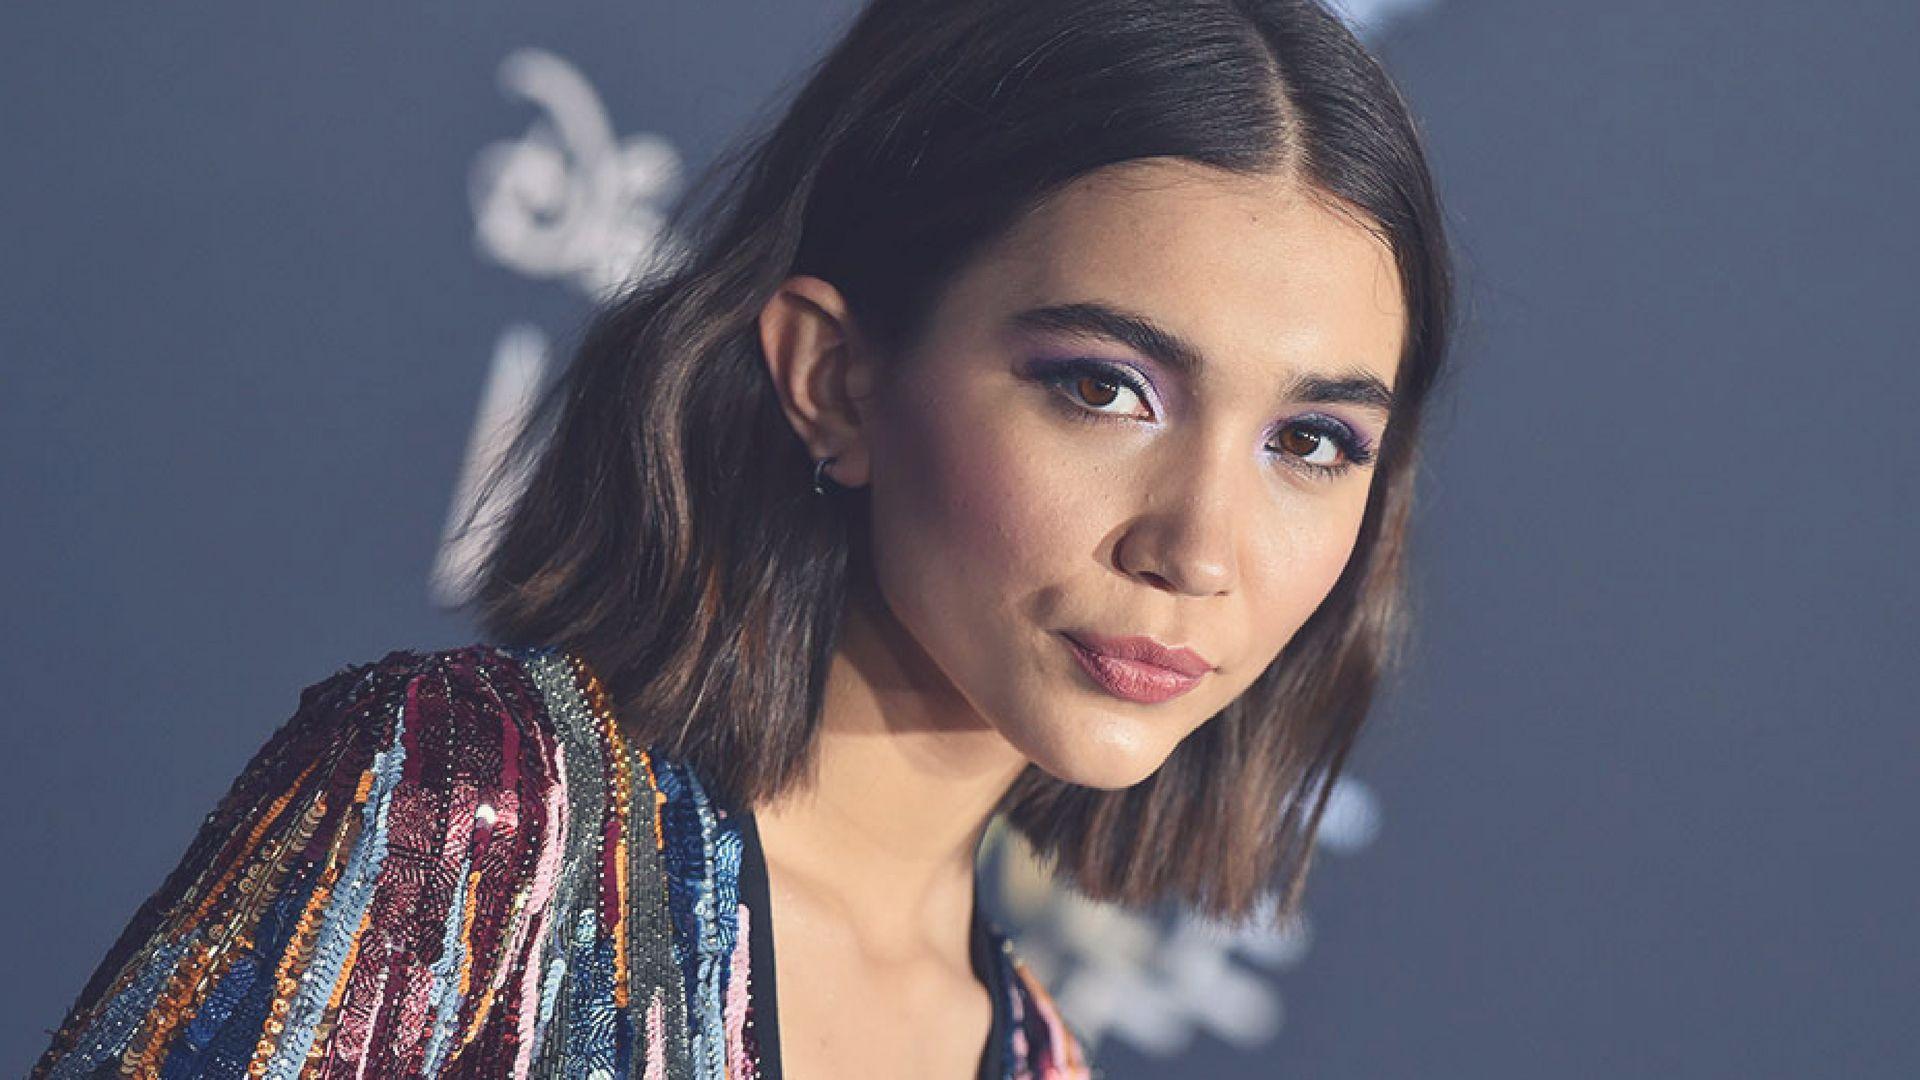 Rowan Blanchard Wallpaper HD Picture and Image Downloads